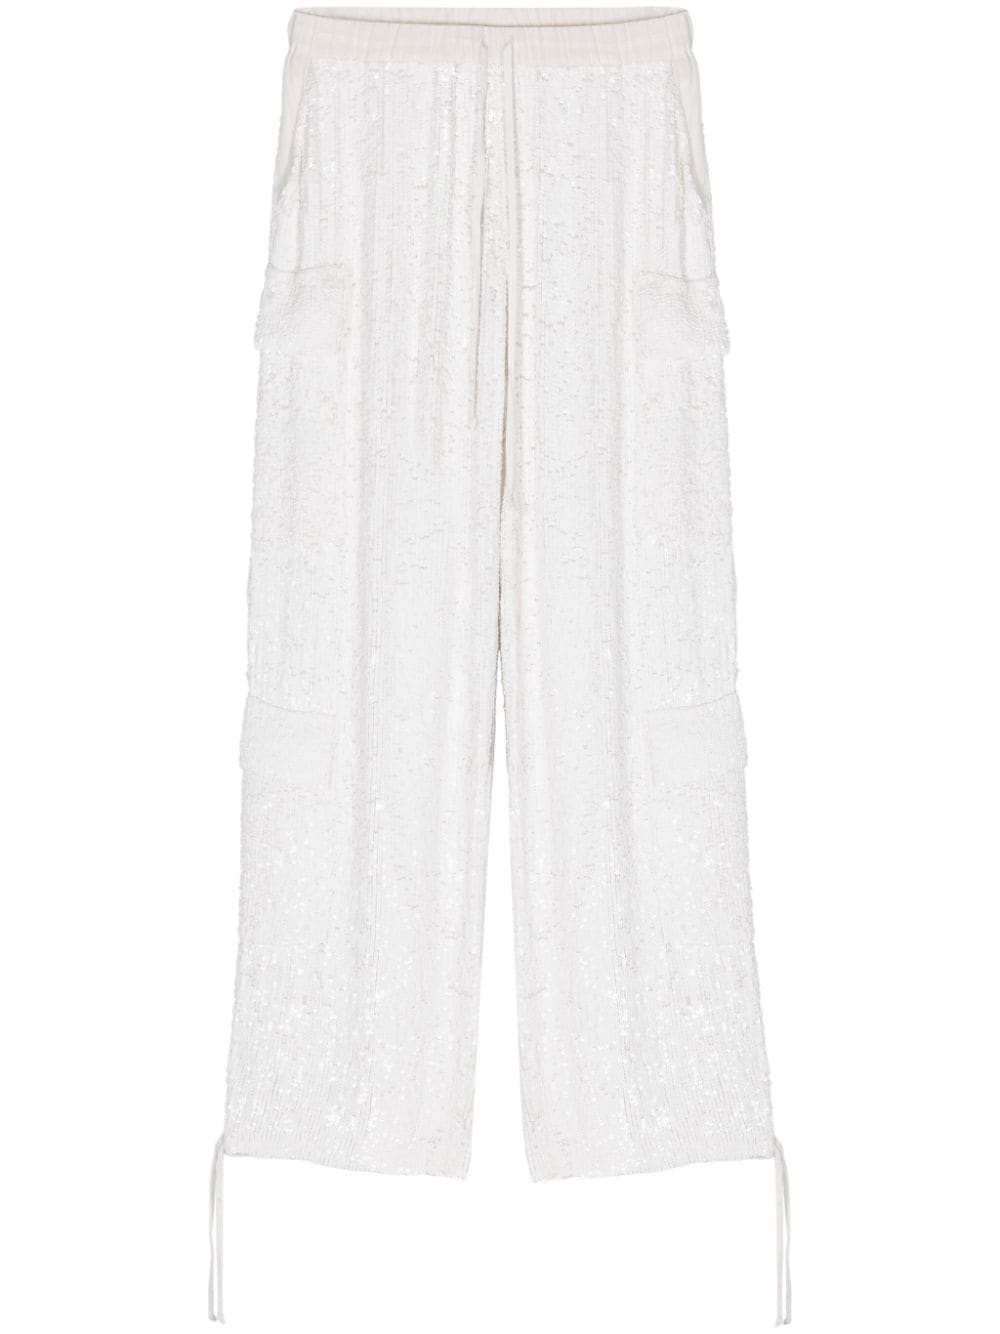 P.A.R.O.S.H. sequinned drawstring cargo trousers - Bianco